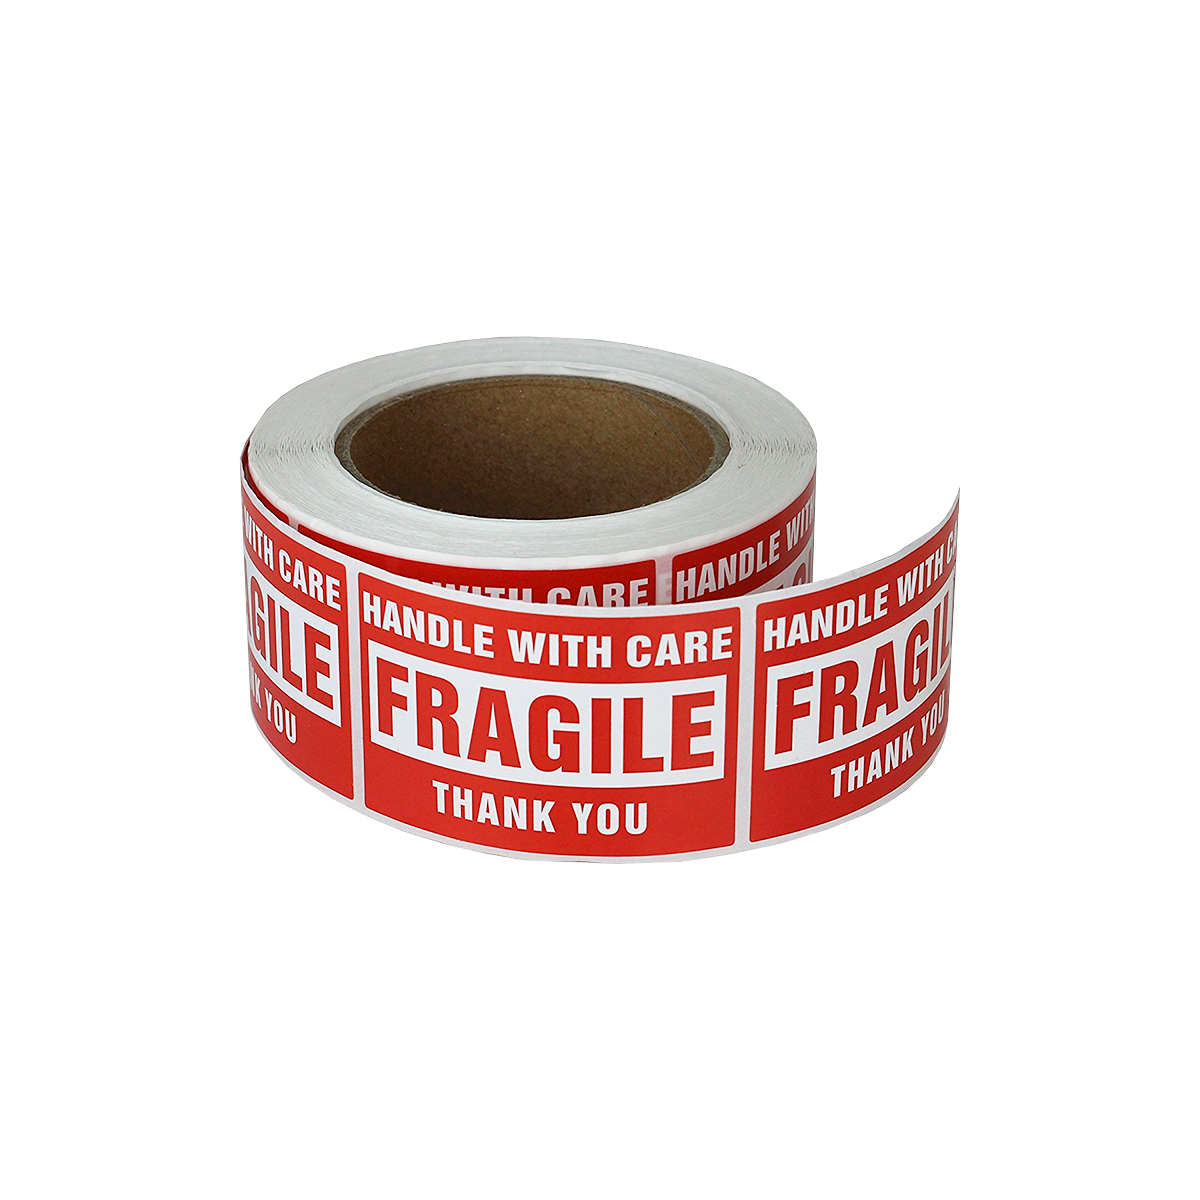 1 Roll 2“ x 3” Fragile Handle With Care Stickers Labels 500 Per Roll Warning